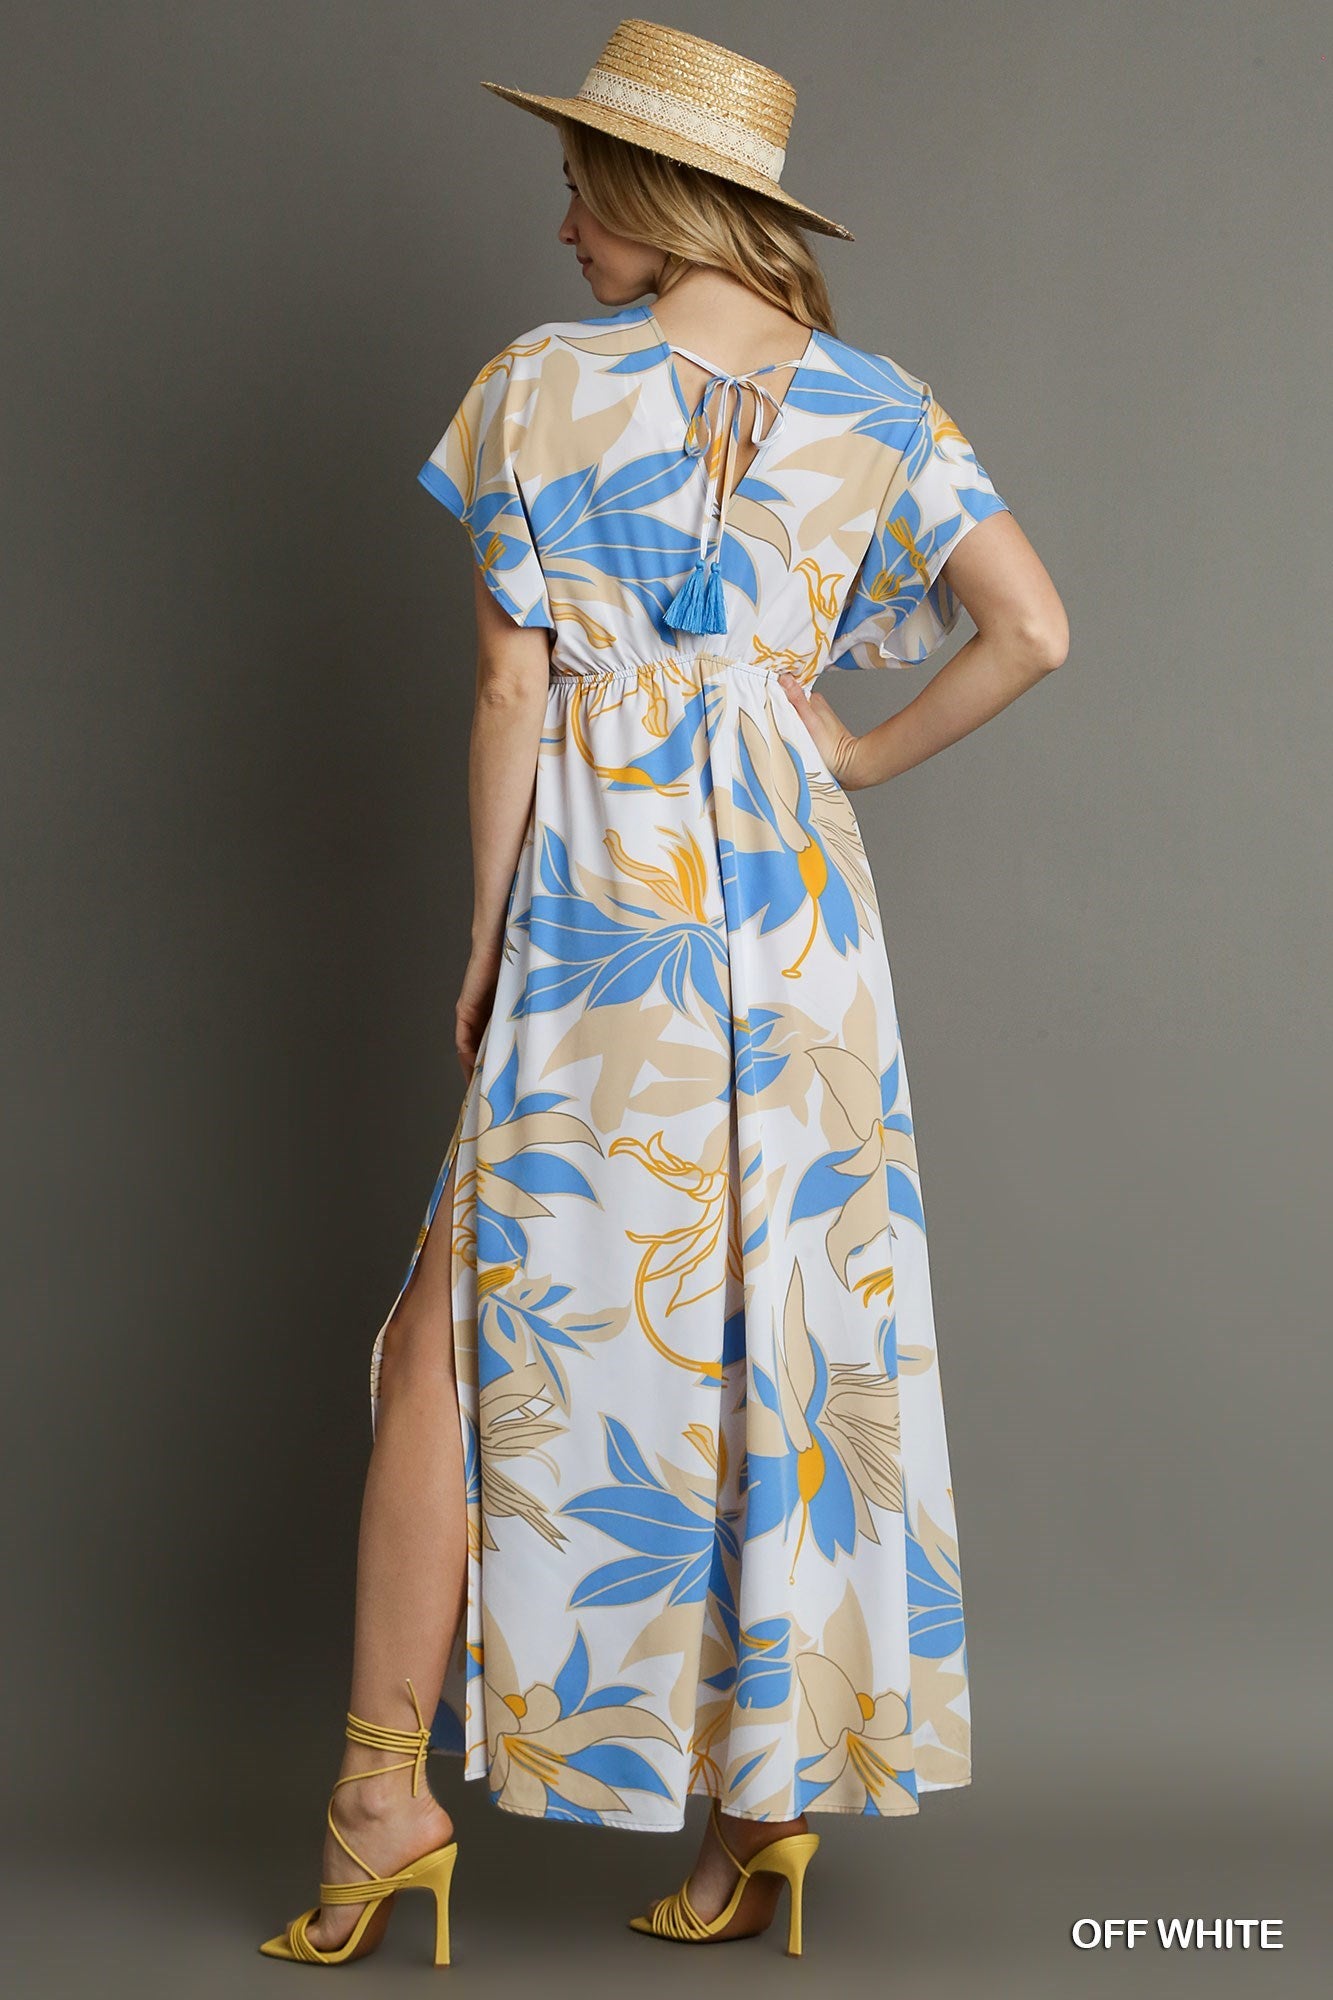 FLORAL A-LINE MAXI DRESS WITH SIDE SLIT - OFF WHITE